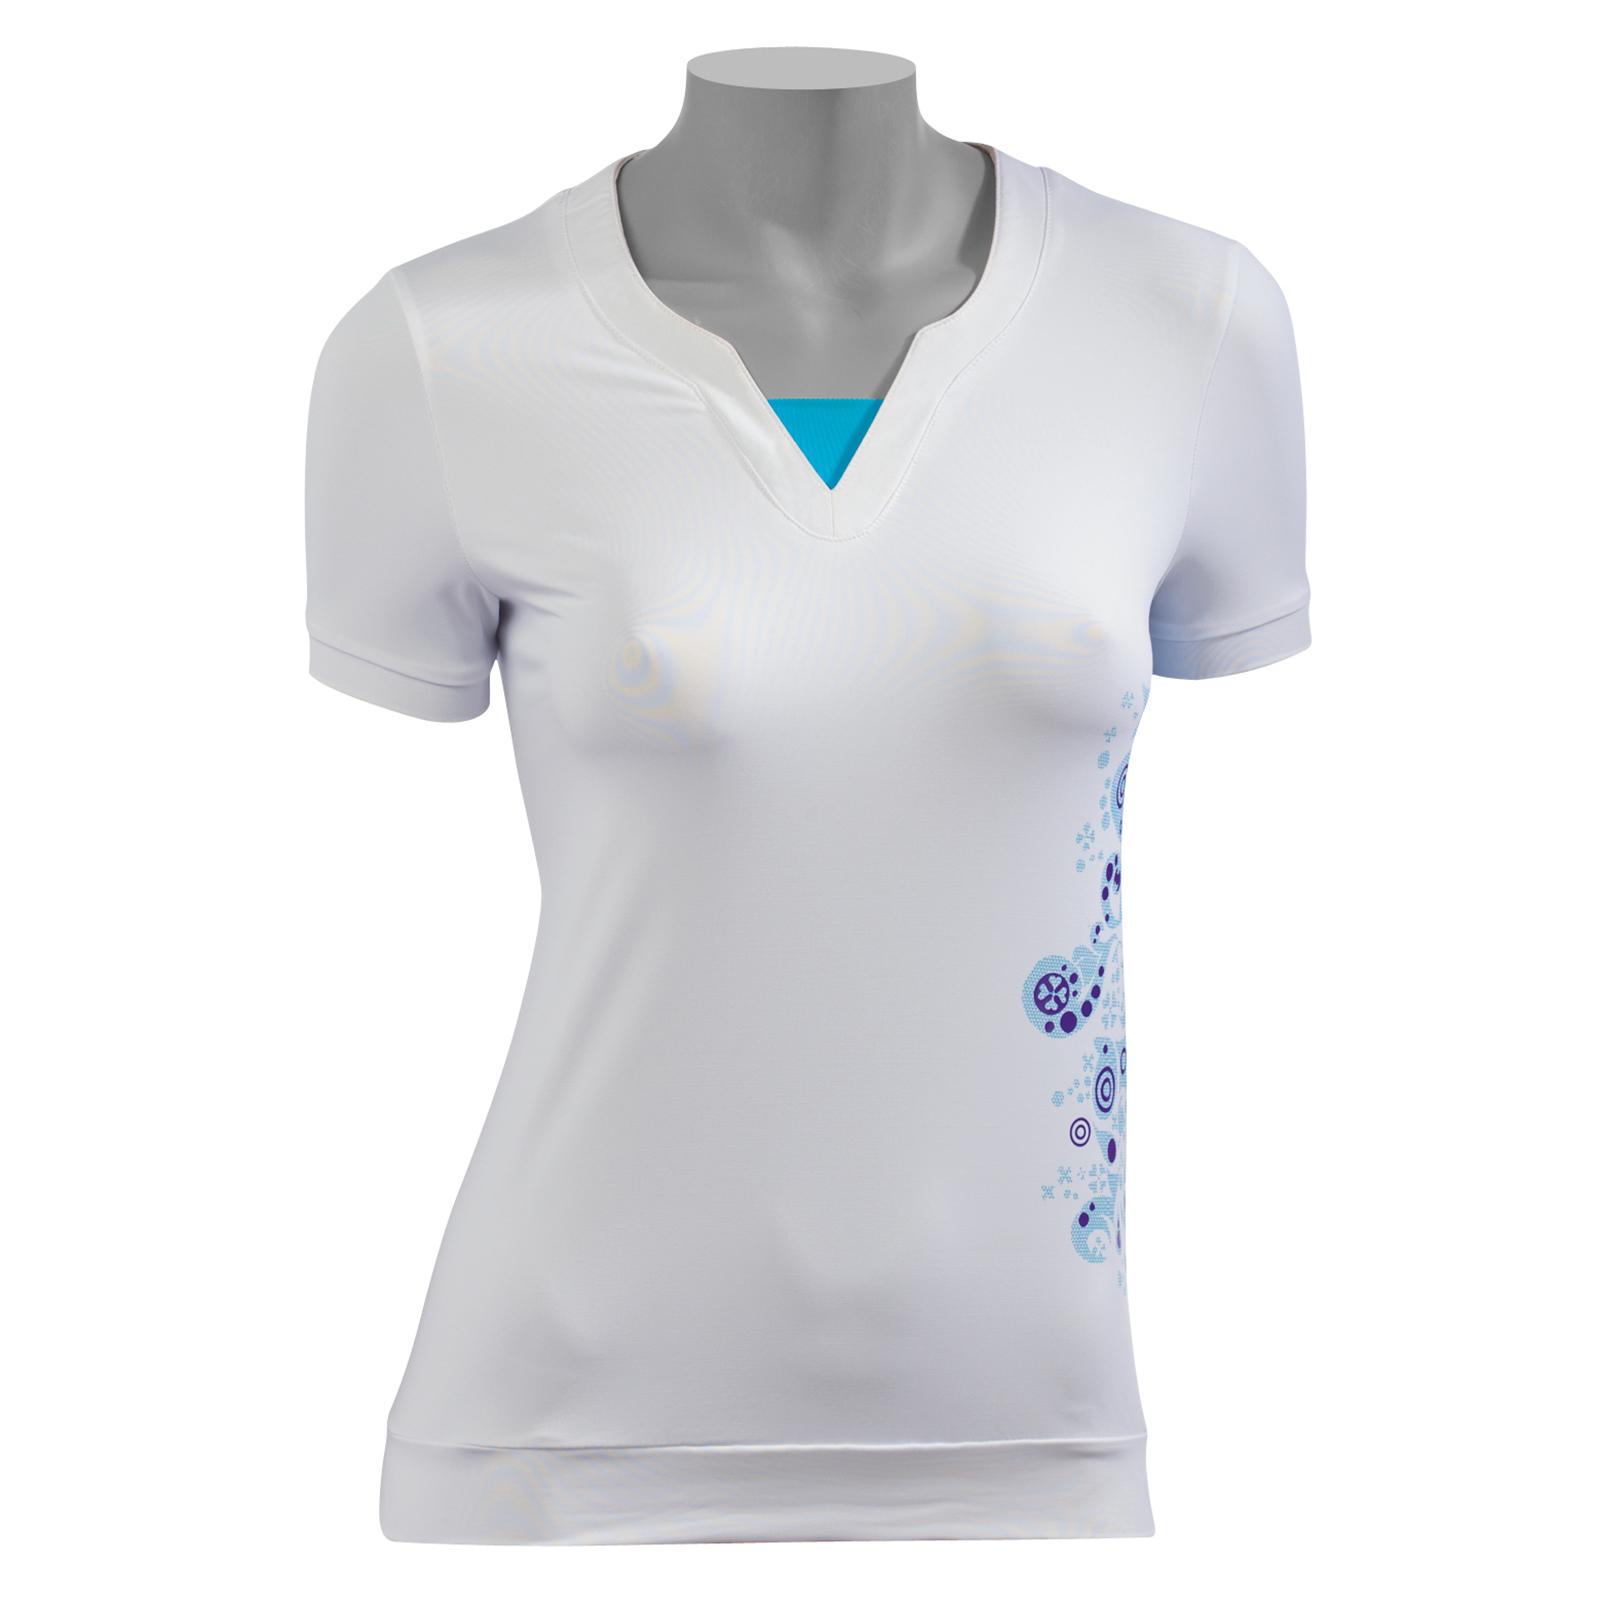 Foto Maillot para ciclismo Northwave Fizz Graphic blanco para mujer , m